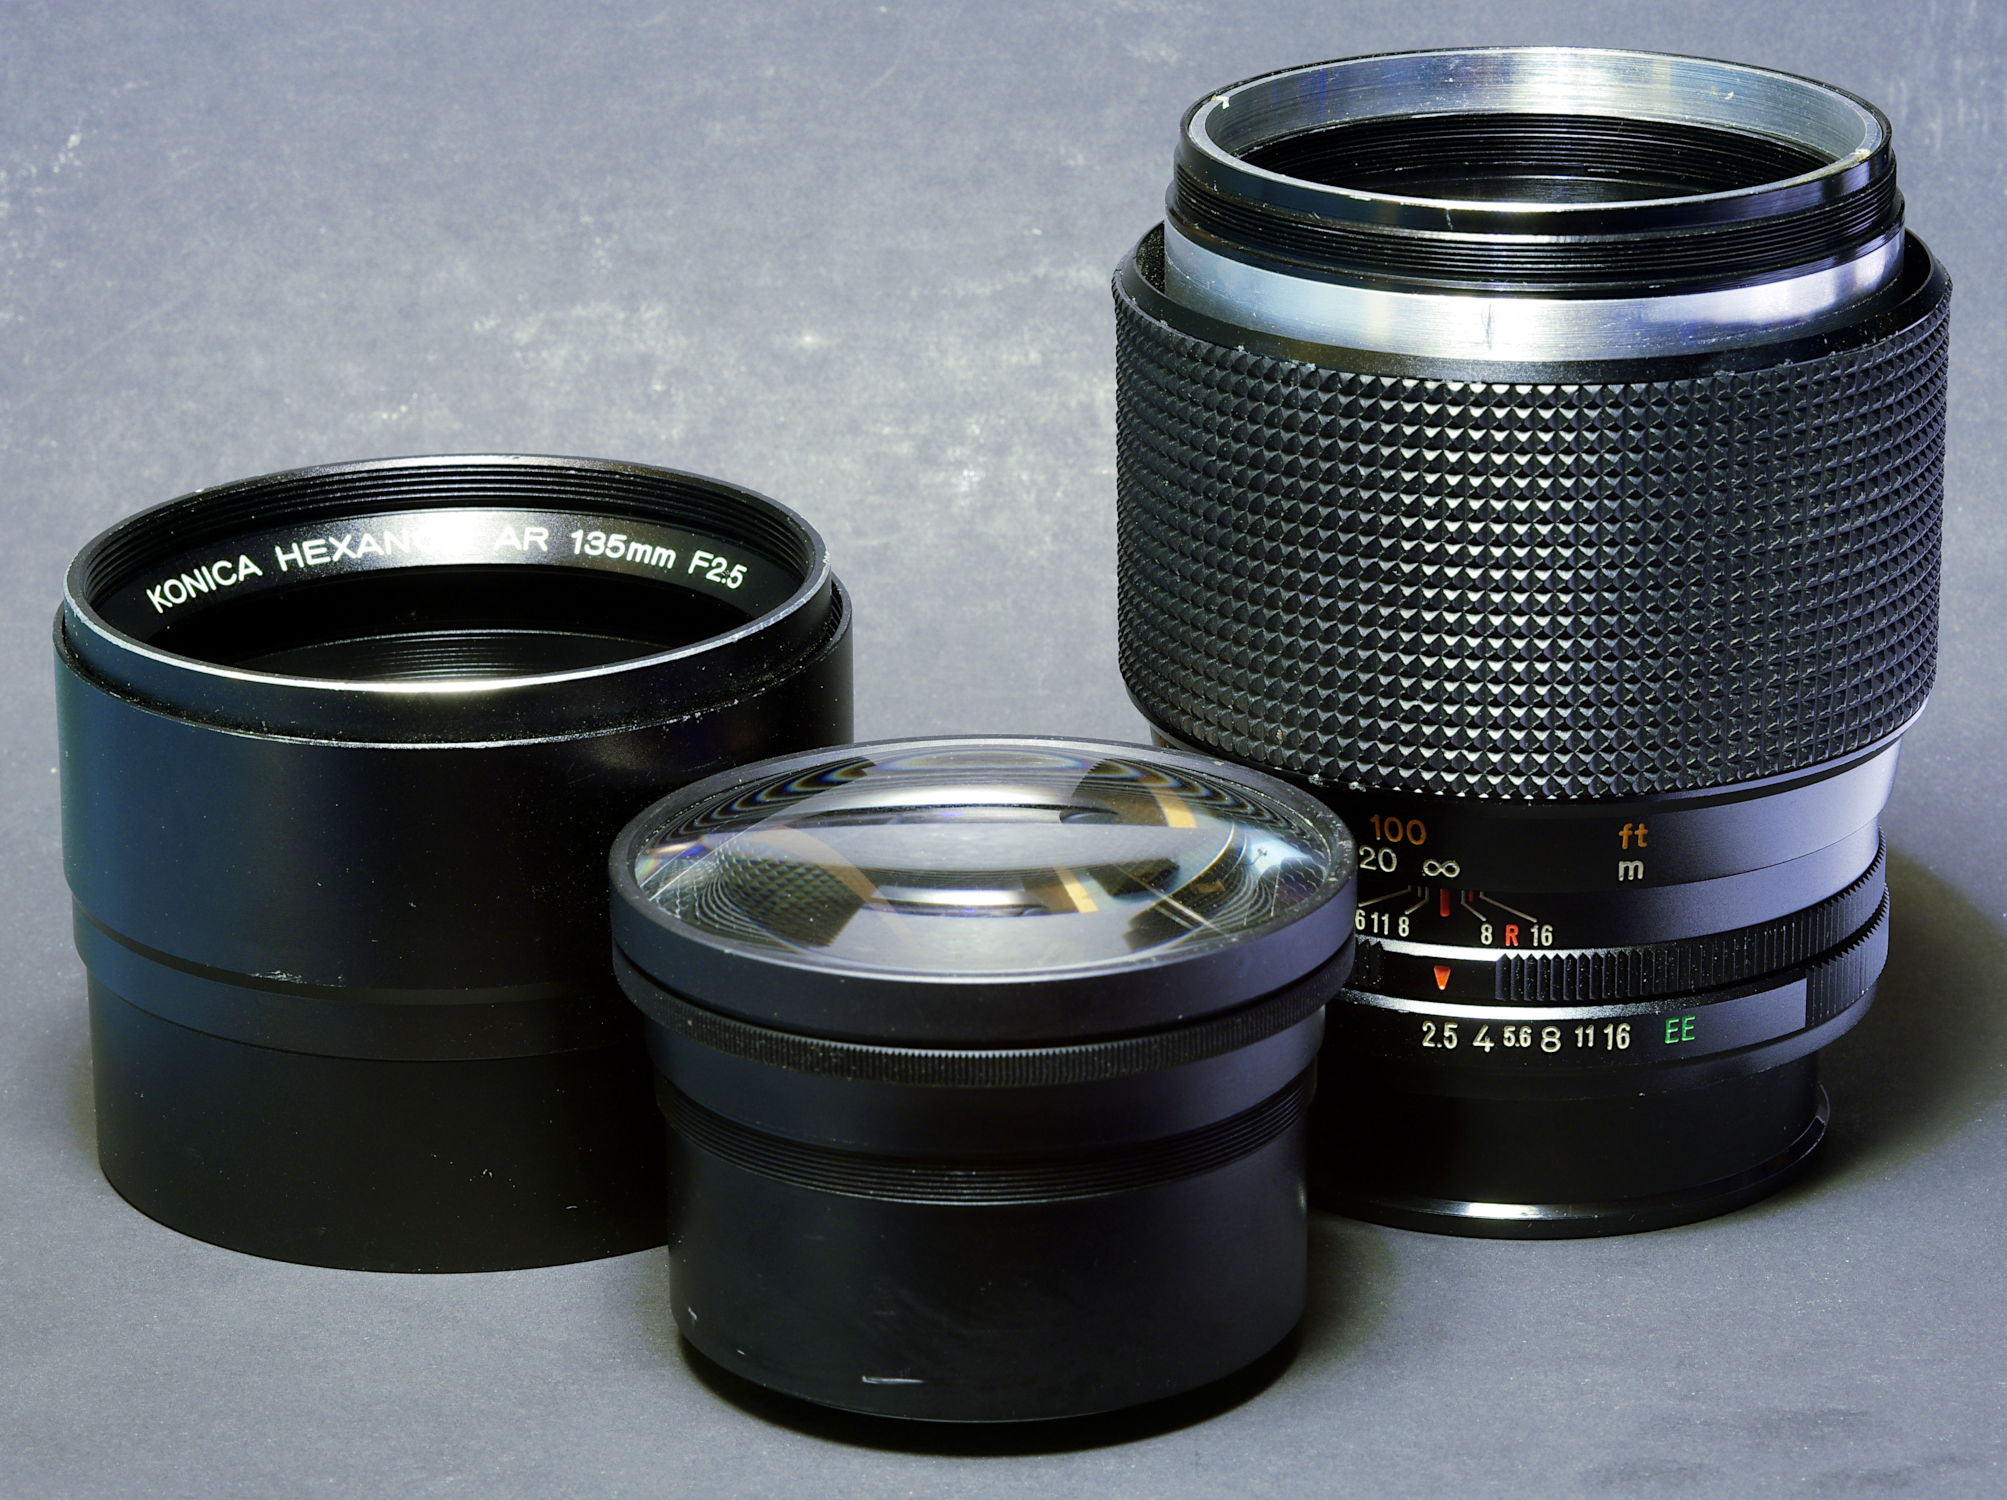 Konica Hexanon AR 135mm f/2.5 disassembly